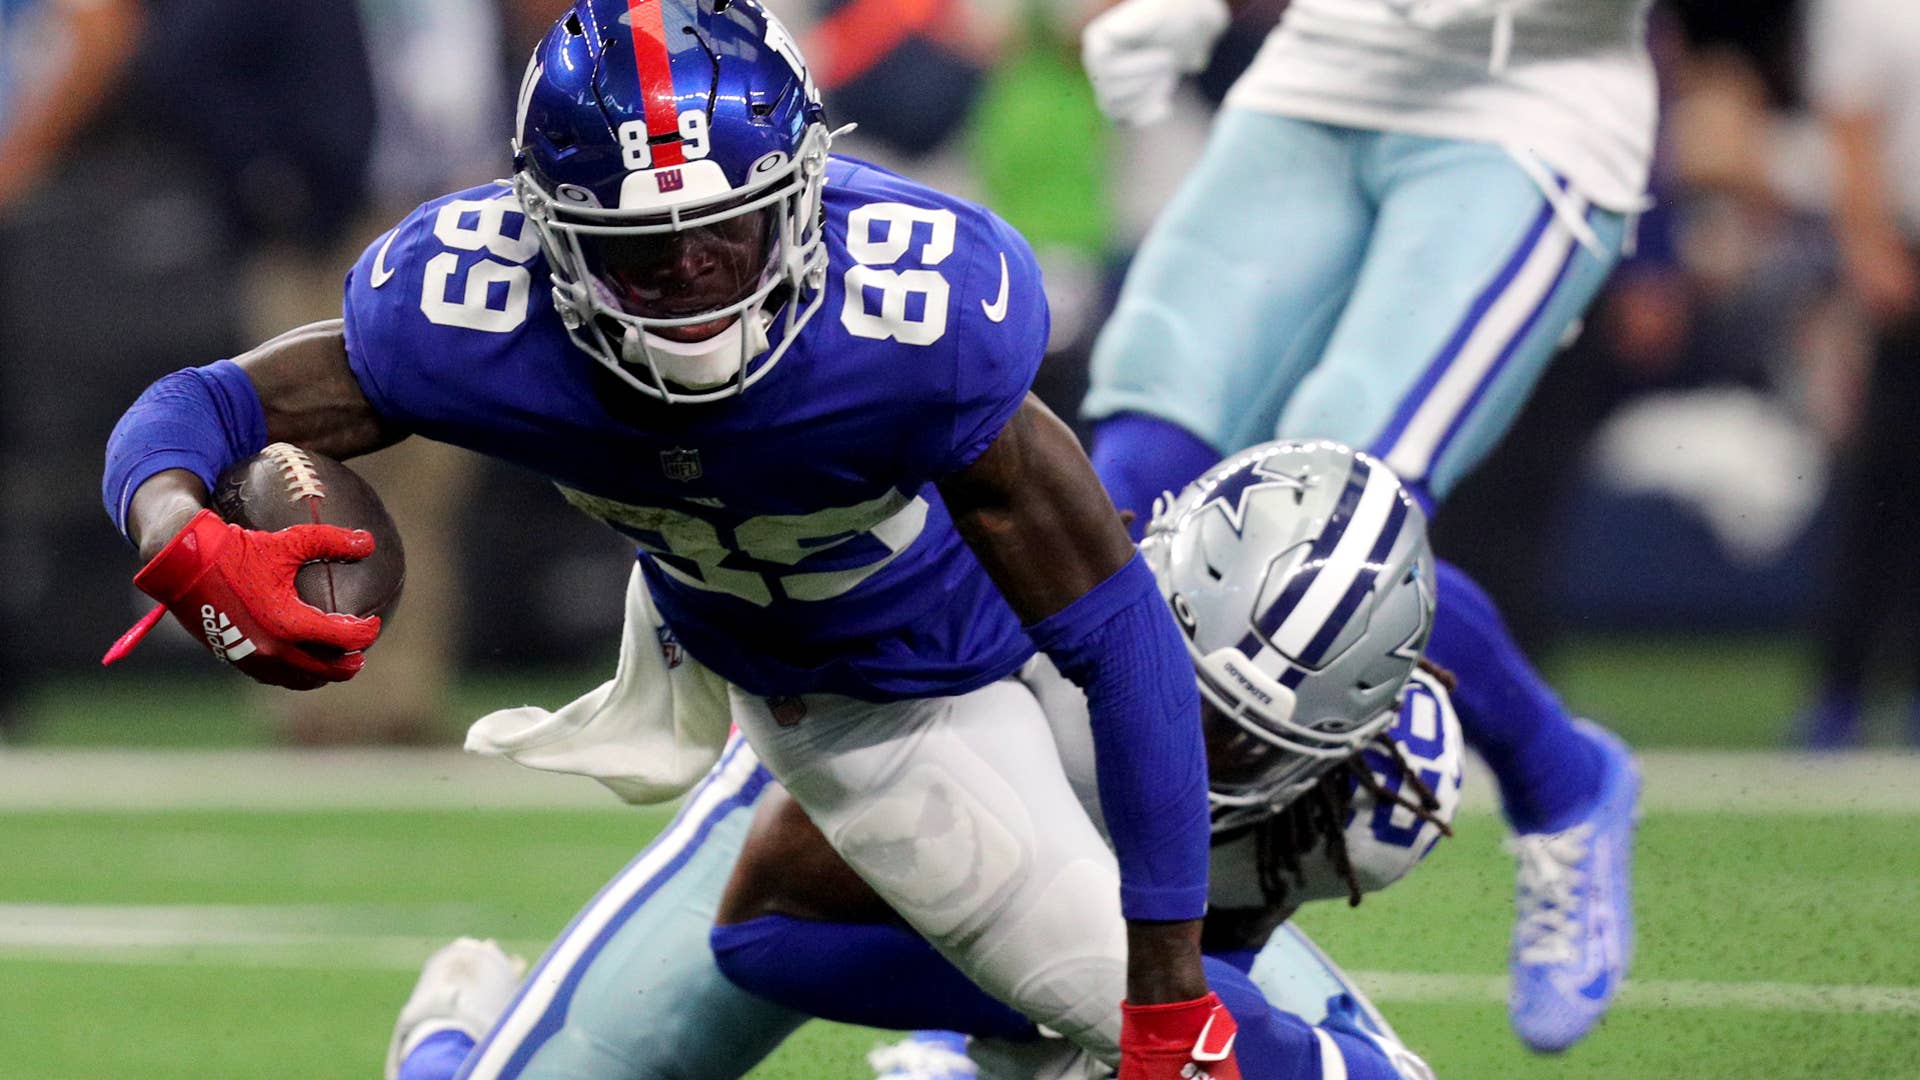 Kadarius Toney of the Giants tackled during game against the Cowboys